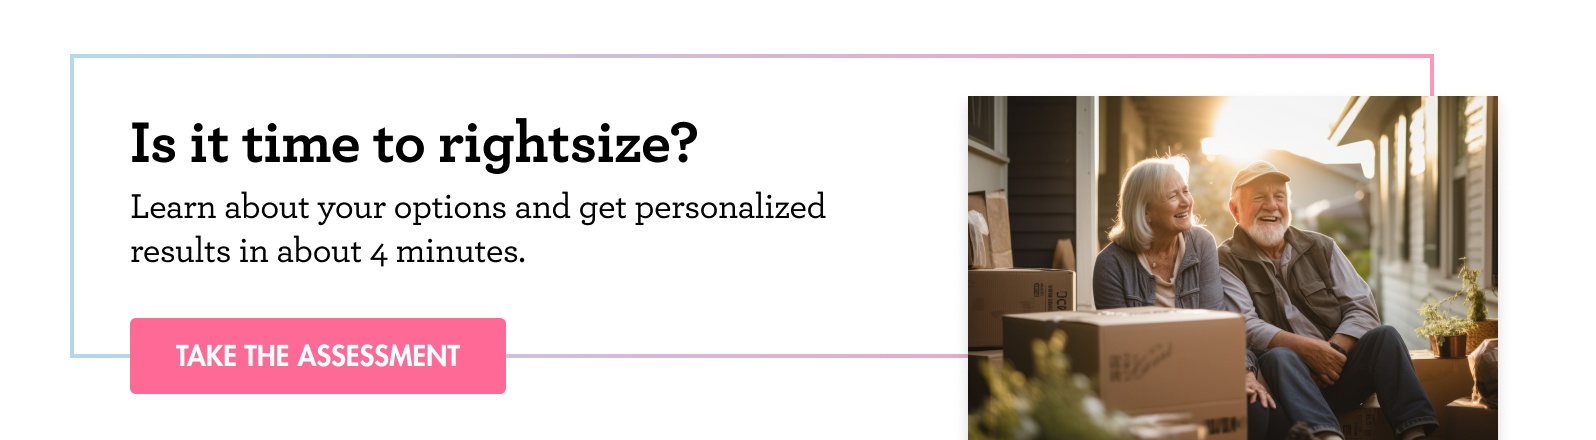 Is it time to rightsize? Call to action to take the 4 minute quiz.